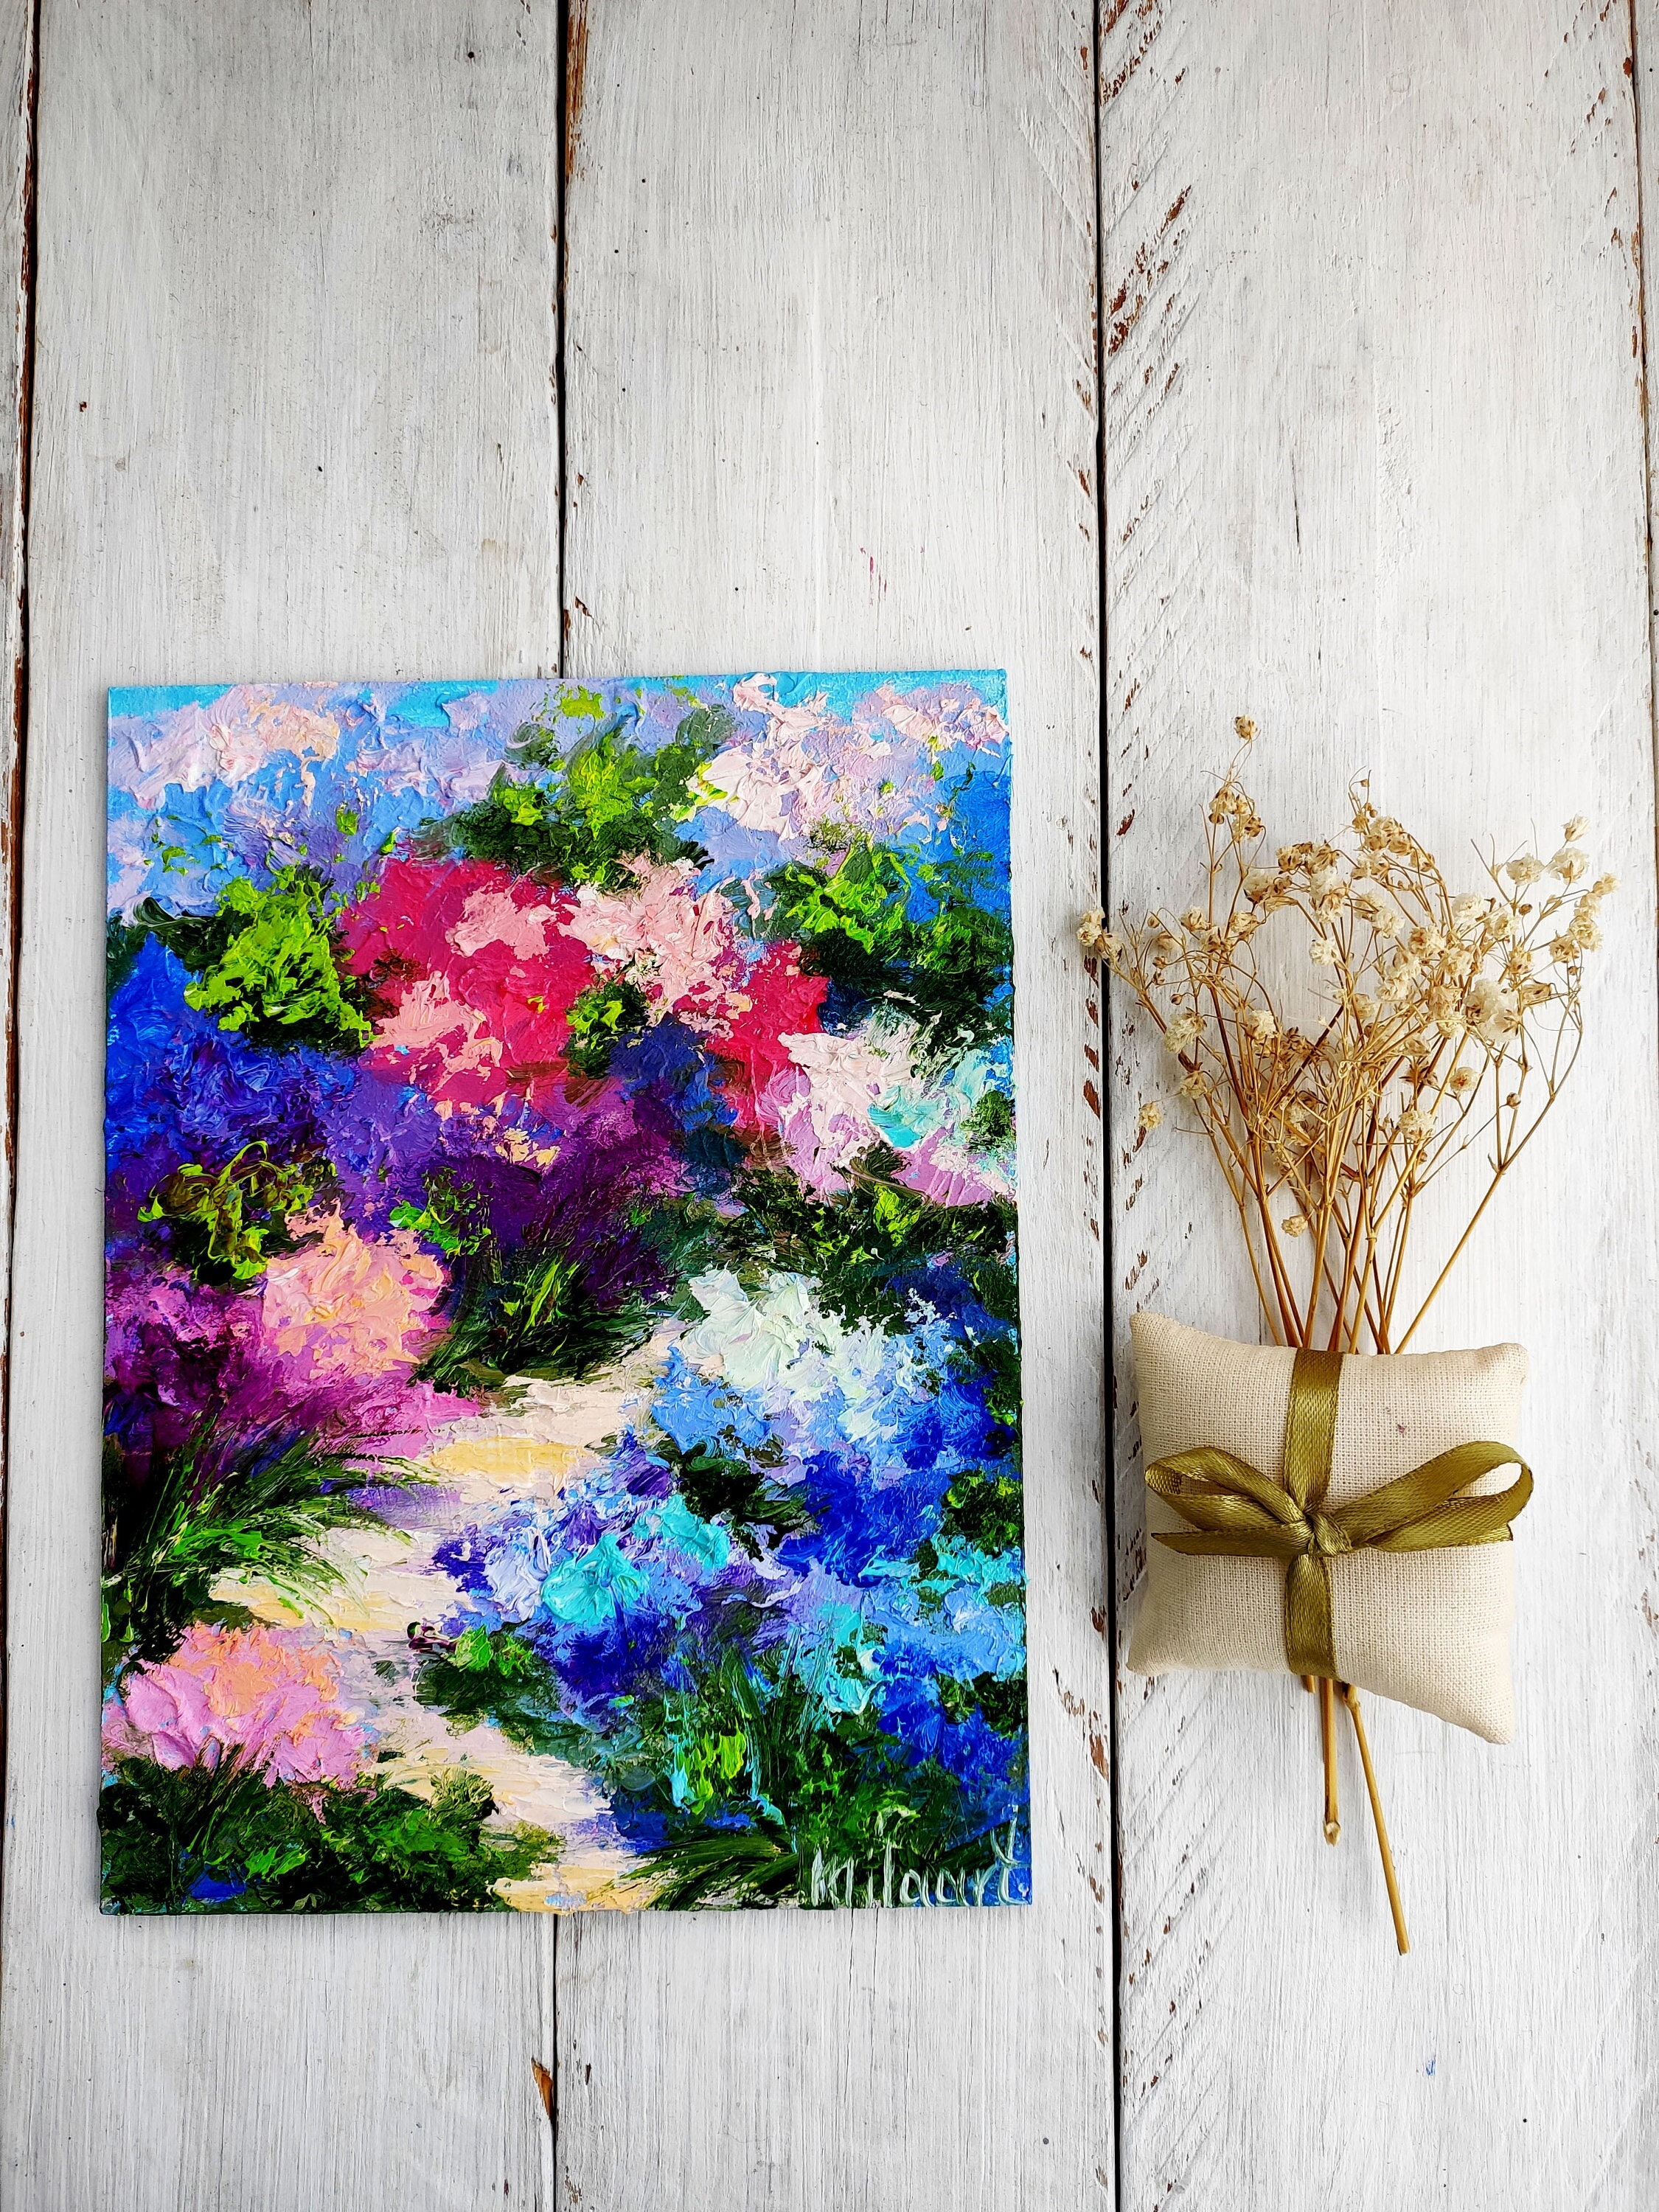 Lilac Floral Original oil painting on canvas board 5x7 Painting by